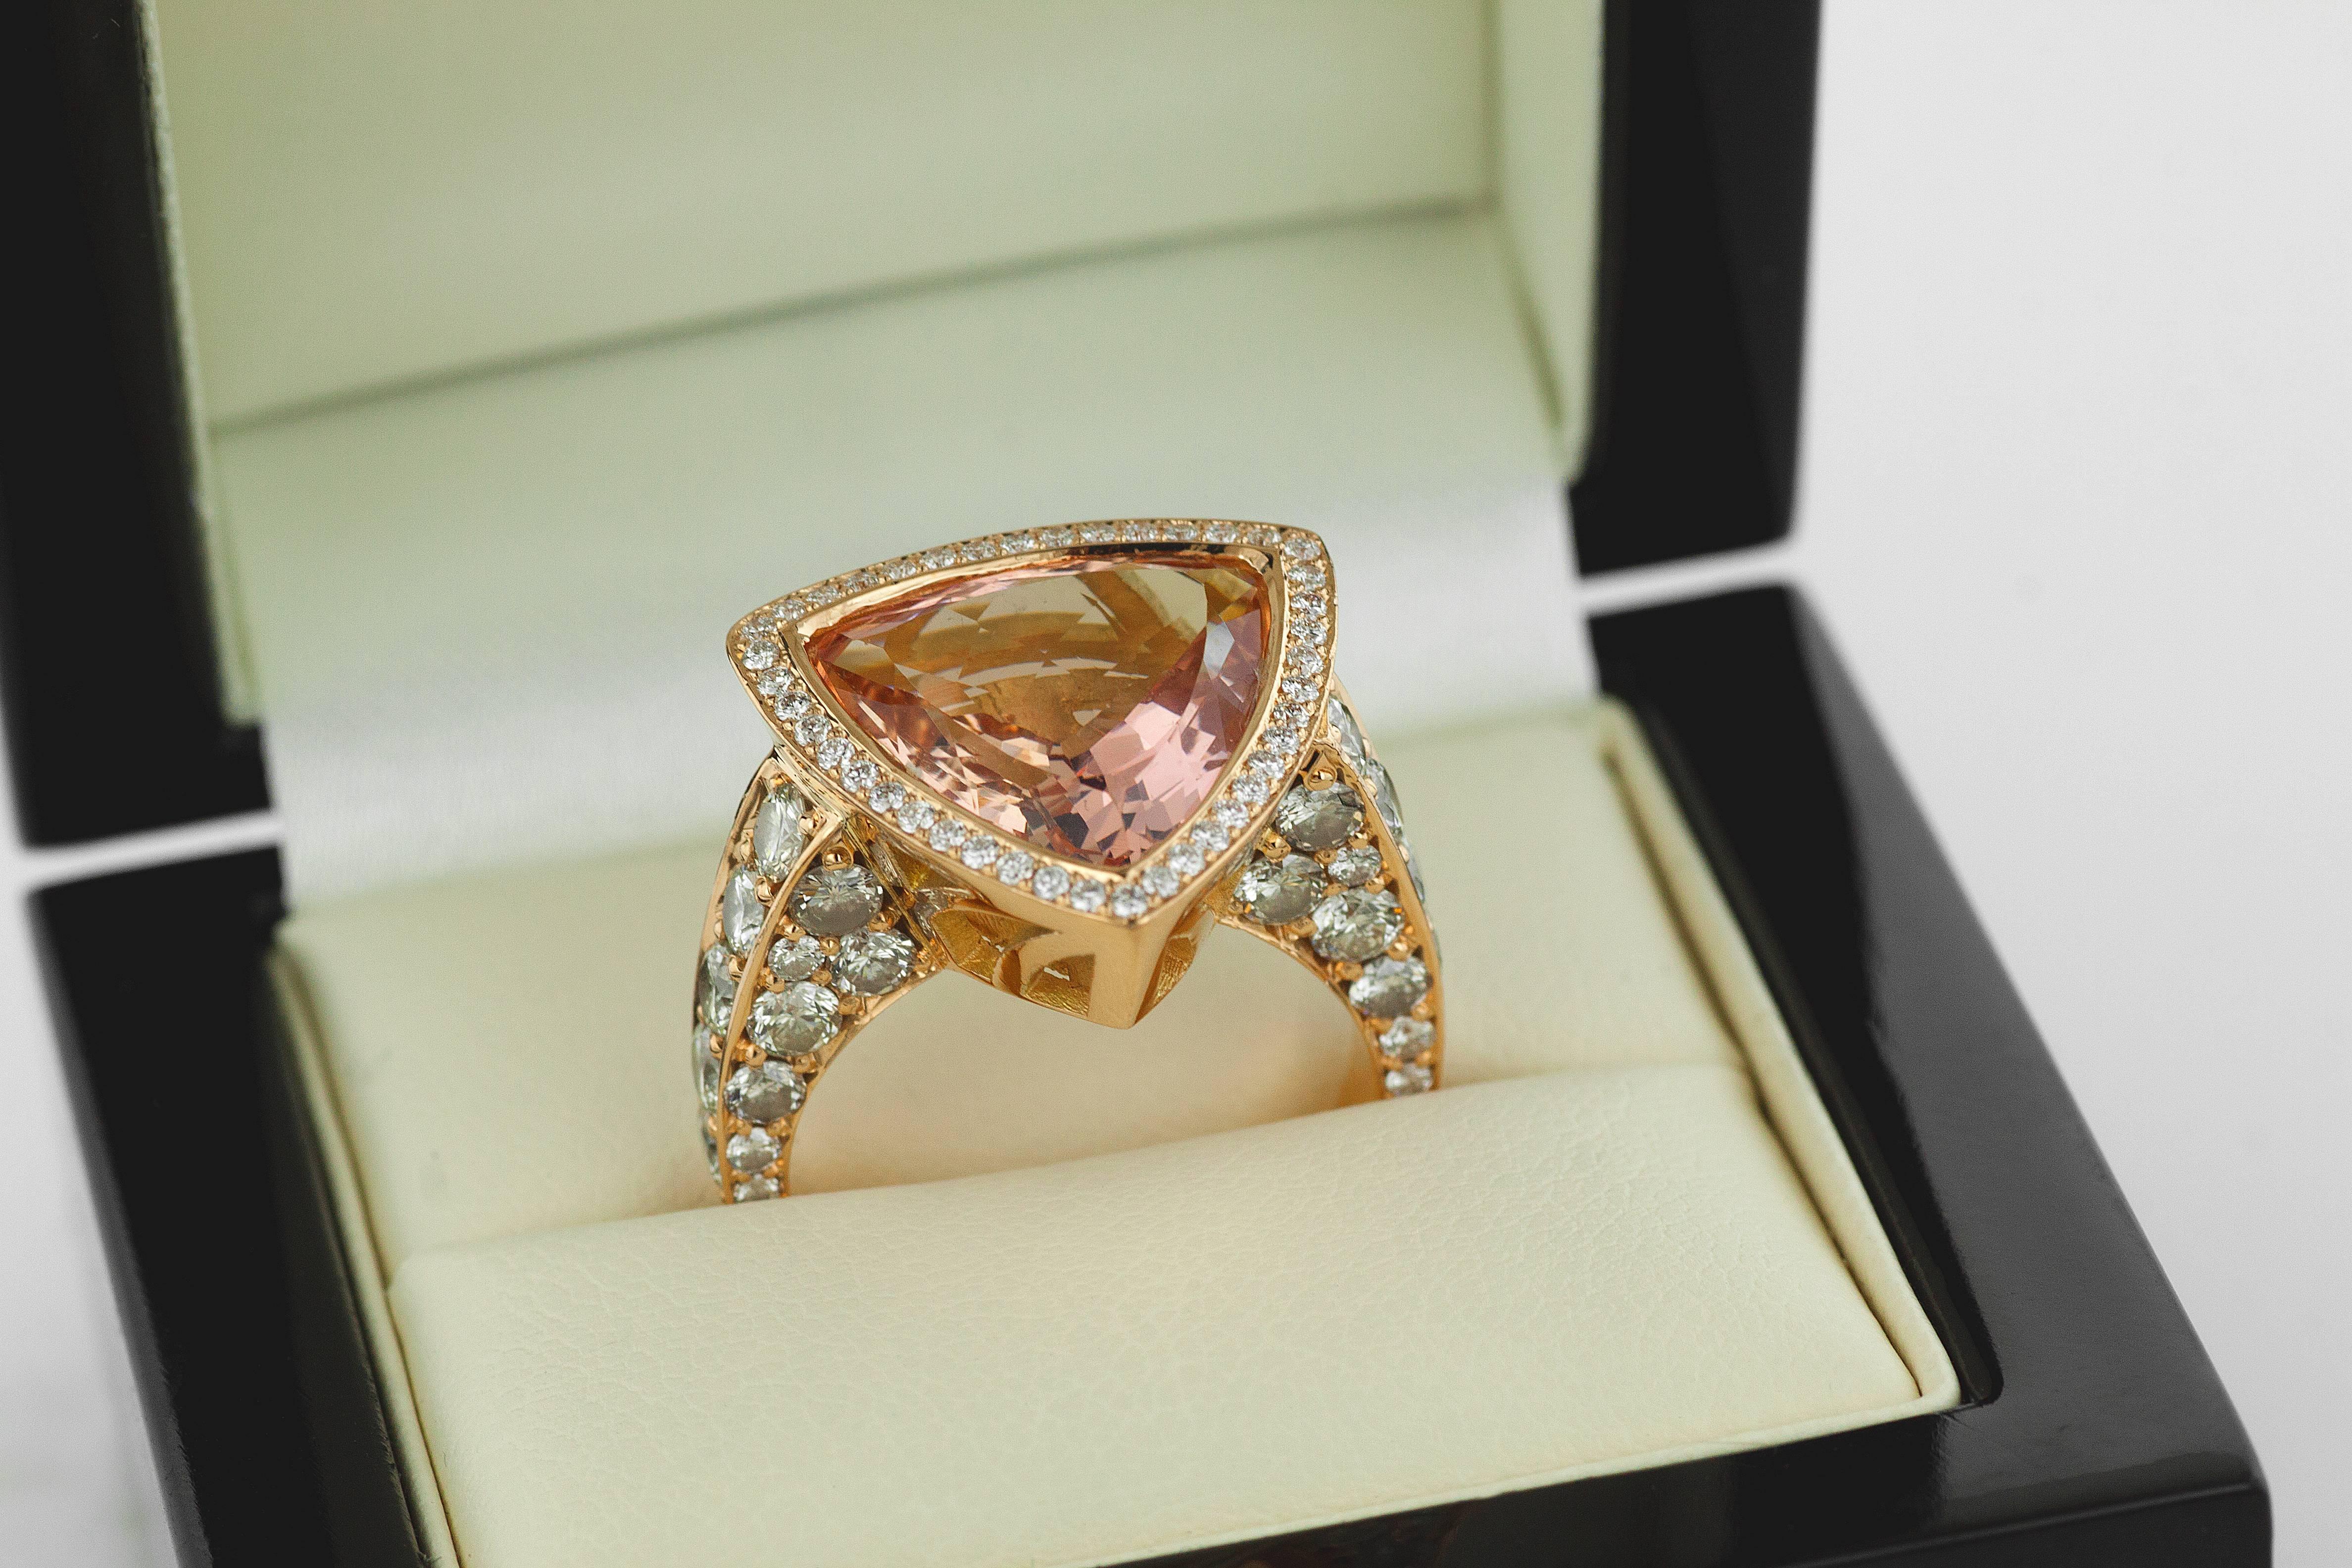 Brand new, one-of-a-kind, pink Morganite & Diamond cocktail ring. The rose gold mounting and setting are especially designed to fully protect the trilliant-cut gemstone, without losing its reflected light sparkle. The 6.40 carat morganite is